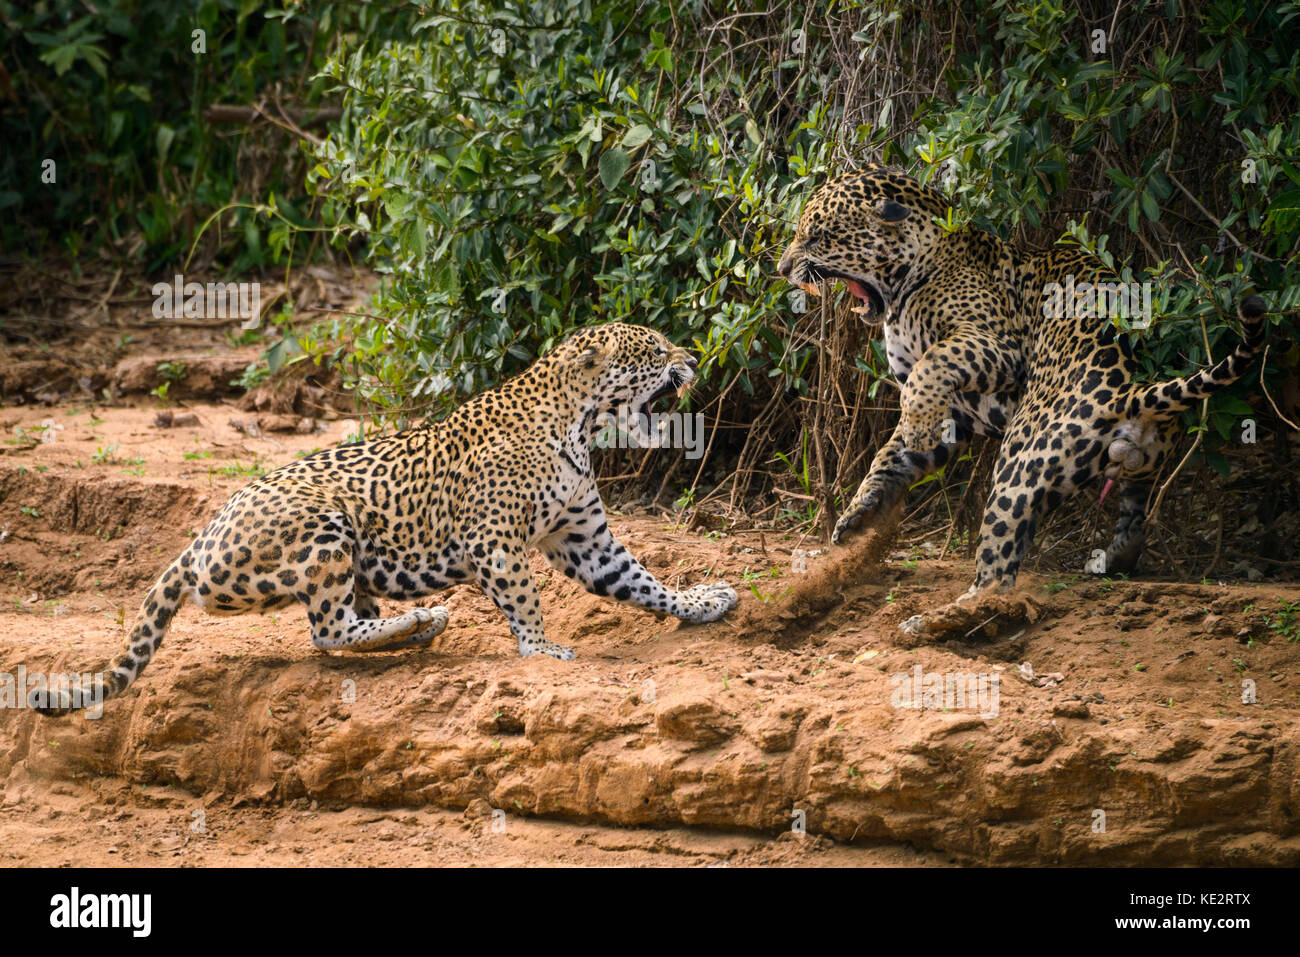 This is part of a sequence of a couple mating Jaguars fighting in the wild. North Pantanal, Brazil. Stock Photo